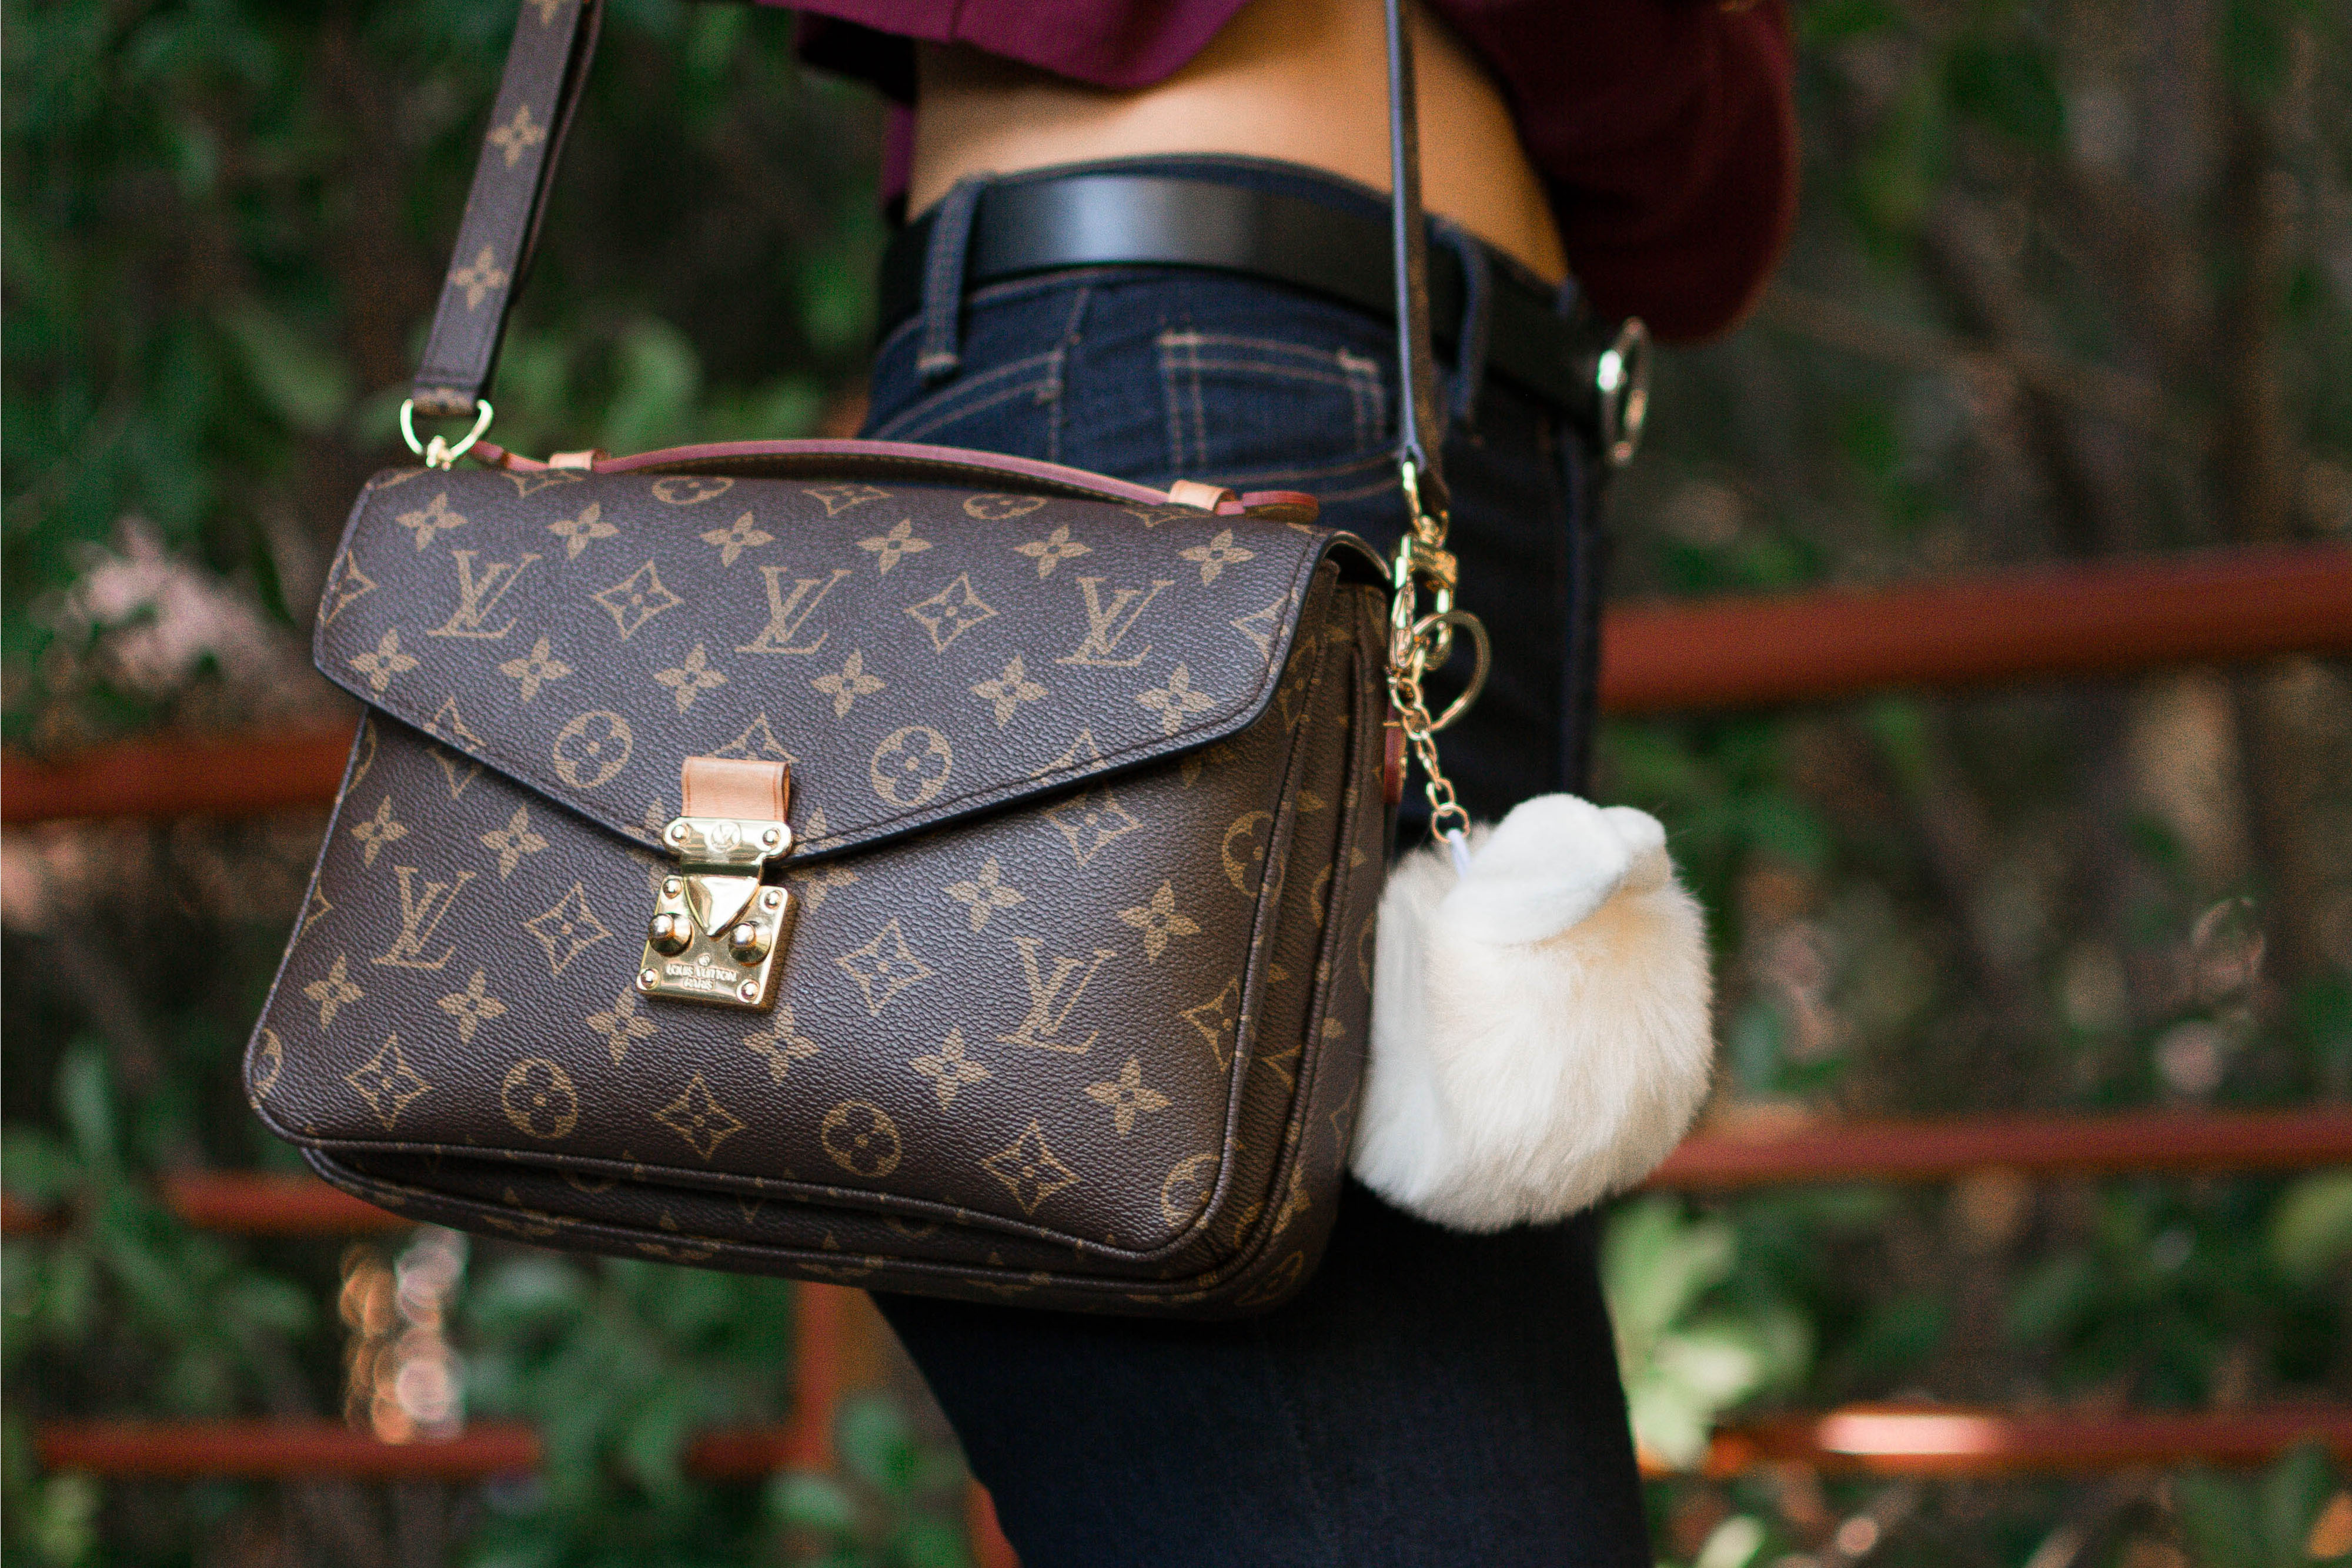 Lifestyle blogger Demi Bang talks about what she keeps in her louis vuitton pochette metis bag and her review.